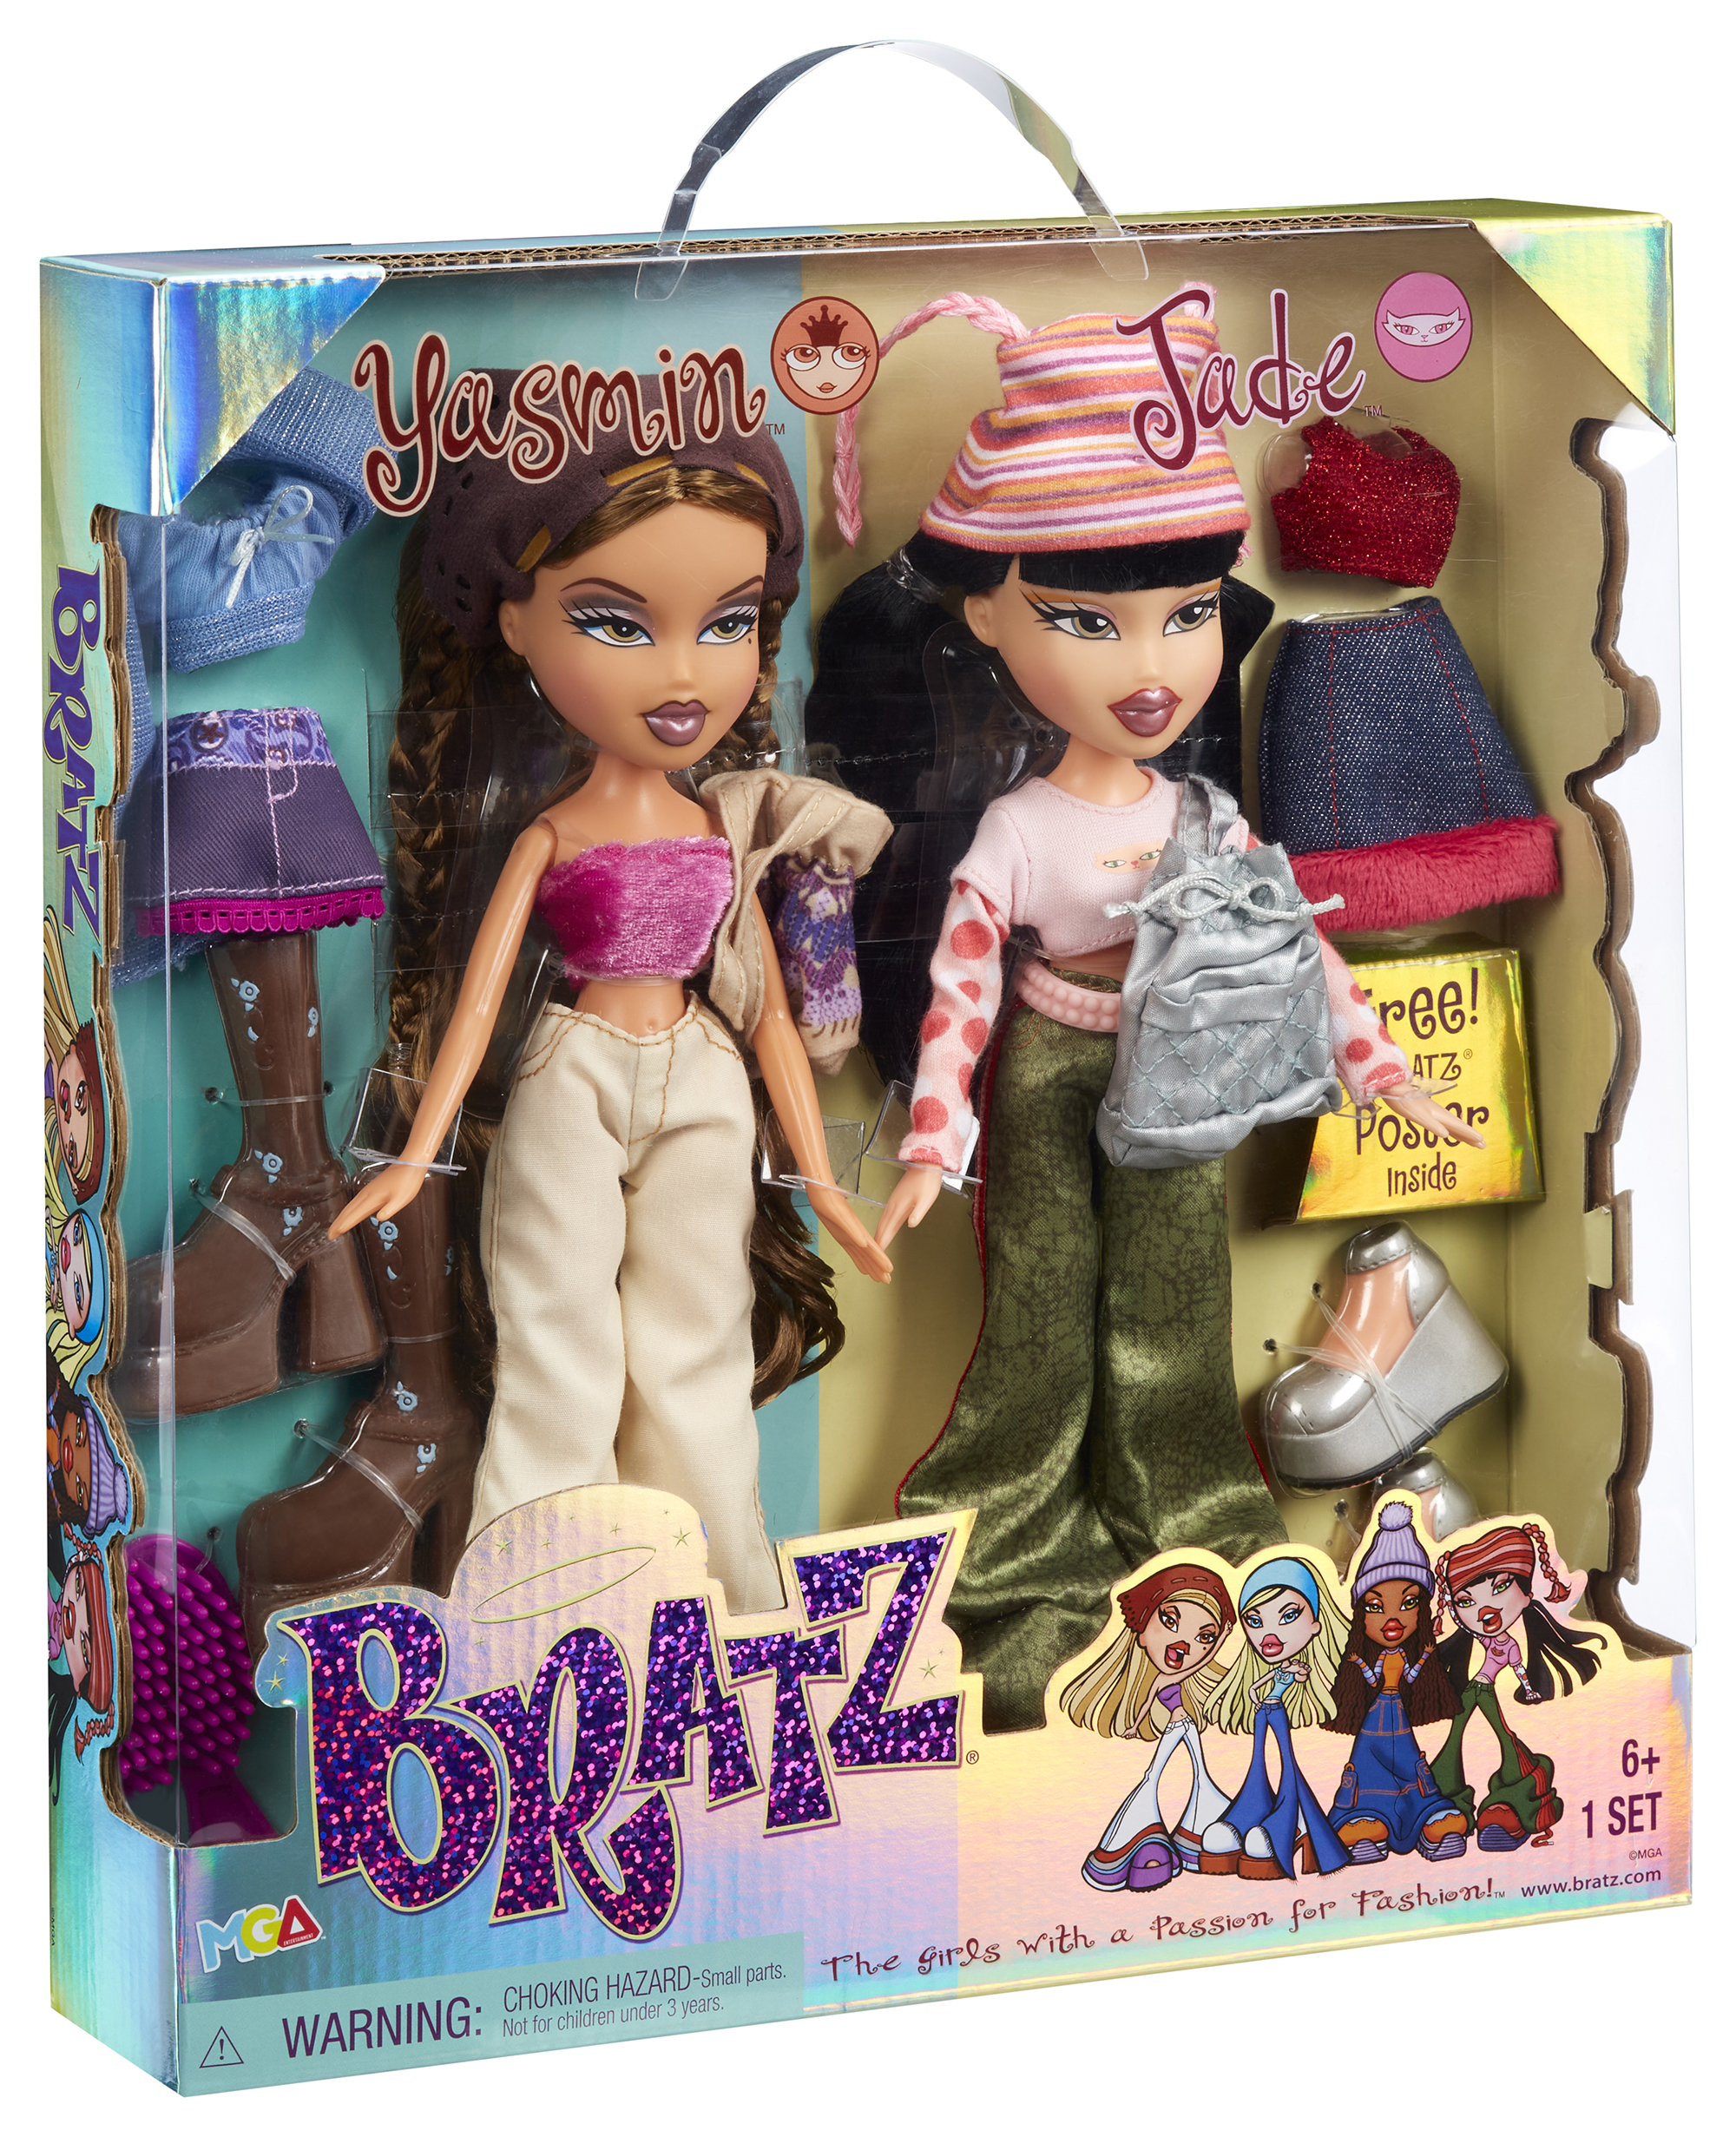 Bratz 2 pack sets of series 1 reproduction dolls 